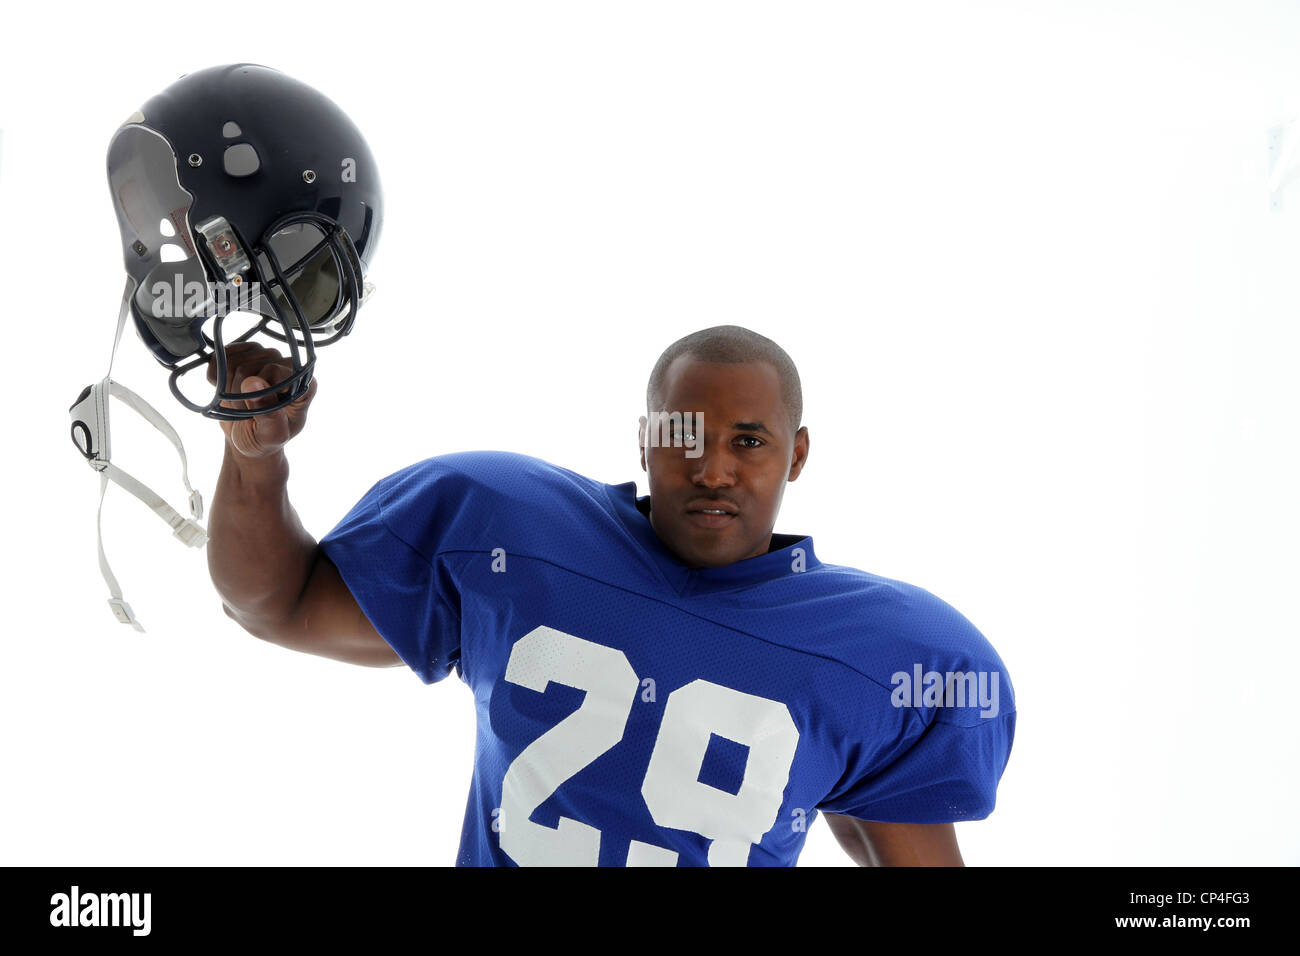 Football Player shot on a white background Stock Photo